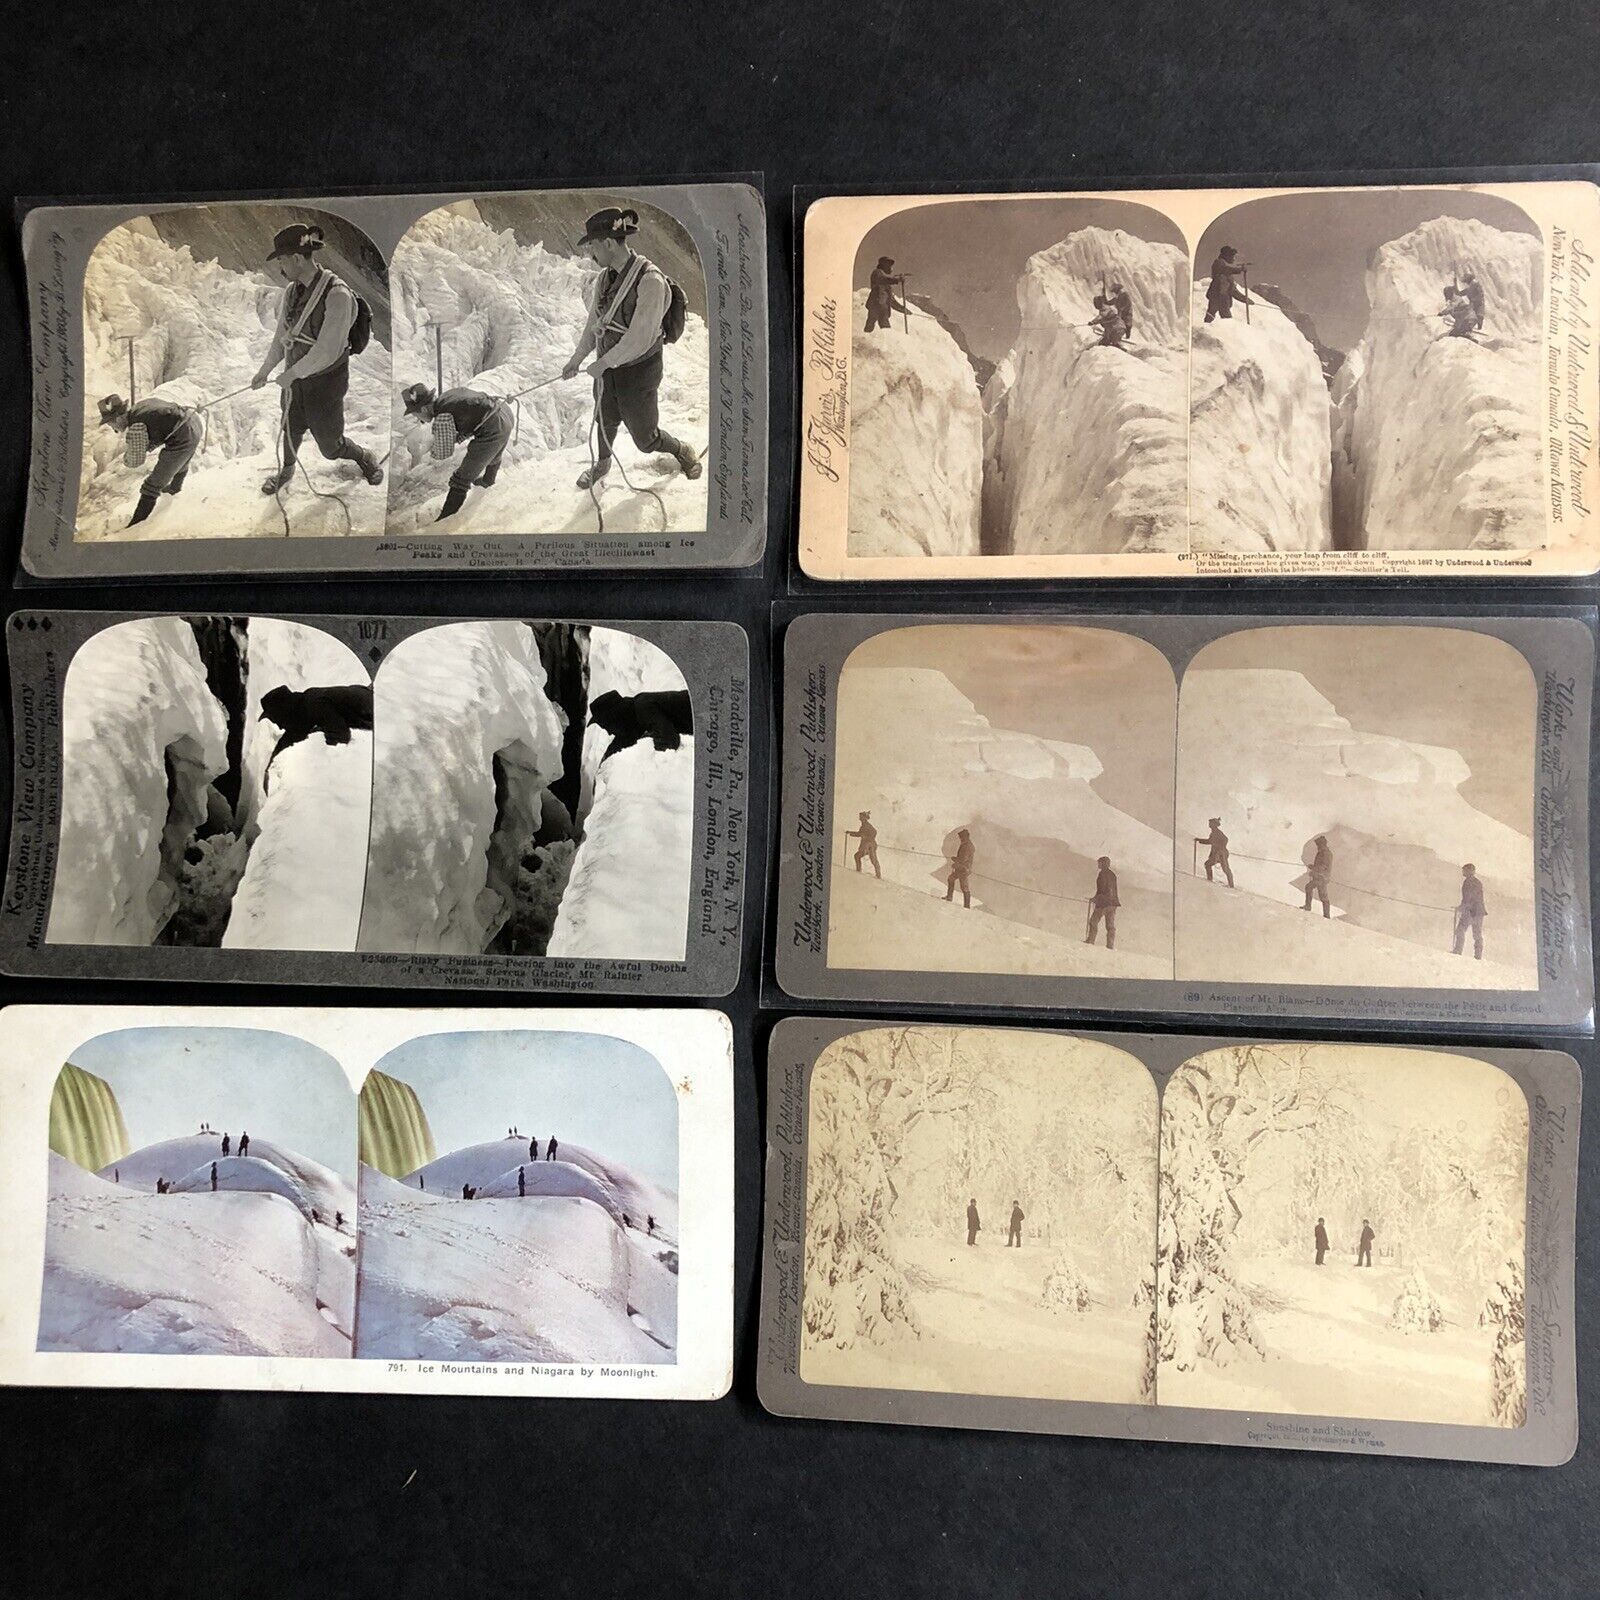 Lot of 6 Antique Stereo View Cards: Mountain Climbing Winter